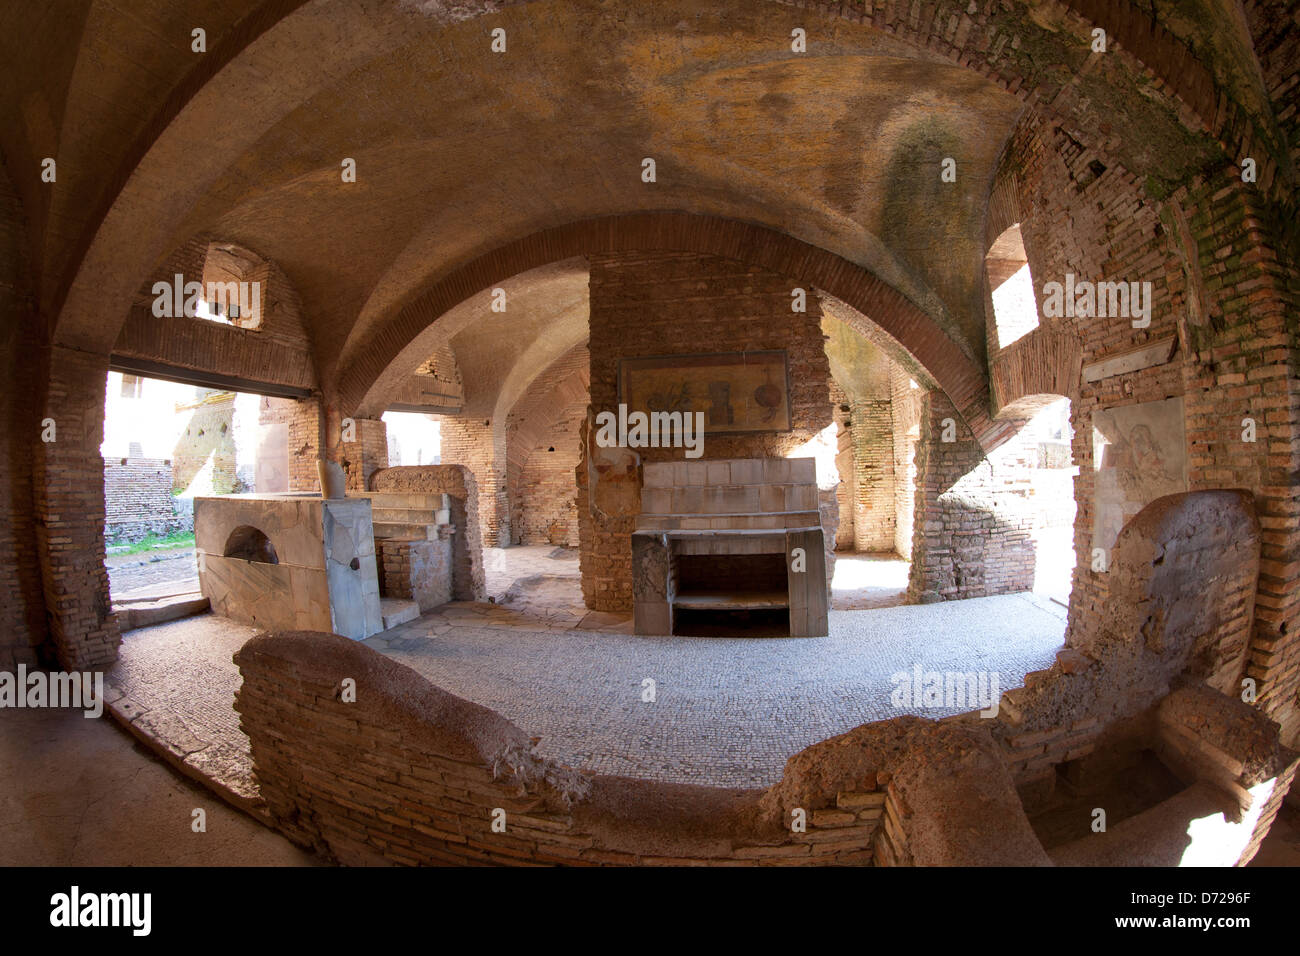 The Thermopolium, a remarkably well preserved tavern, coffee shop or cafe in Ostia Antica, Rome, Italy Stock Photo